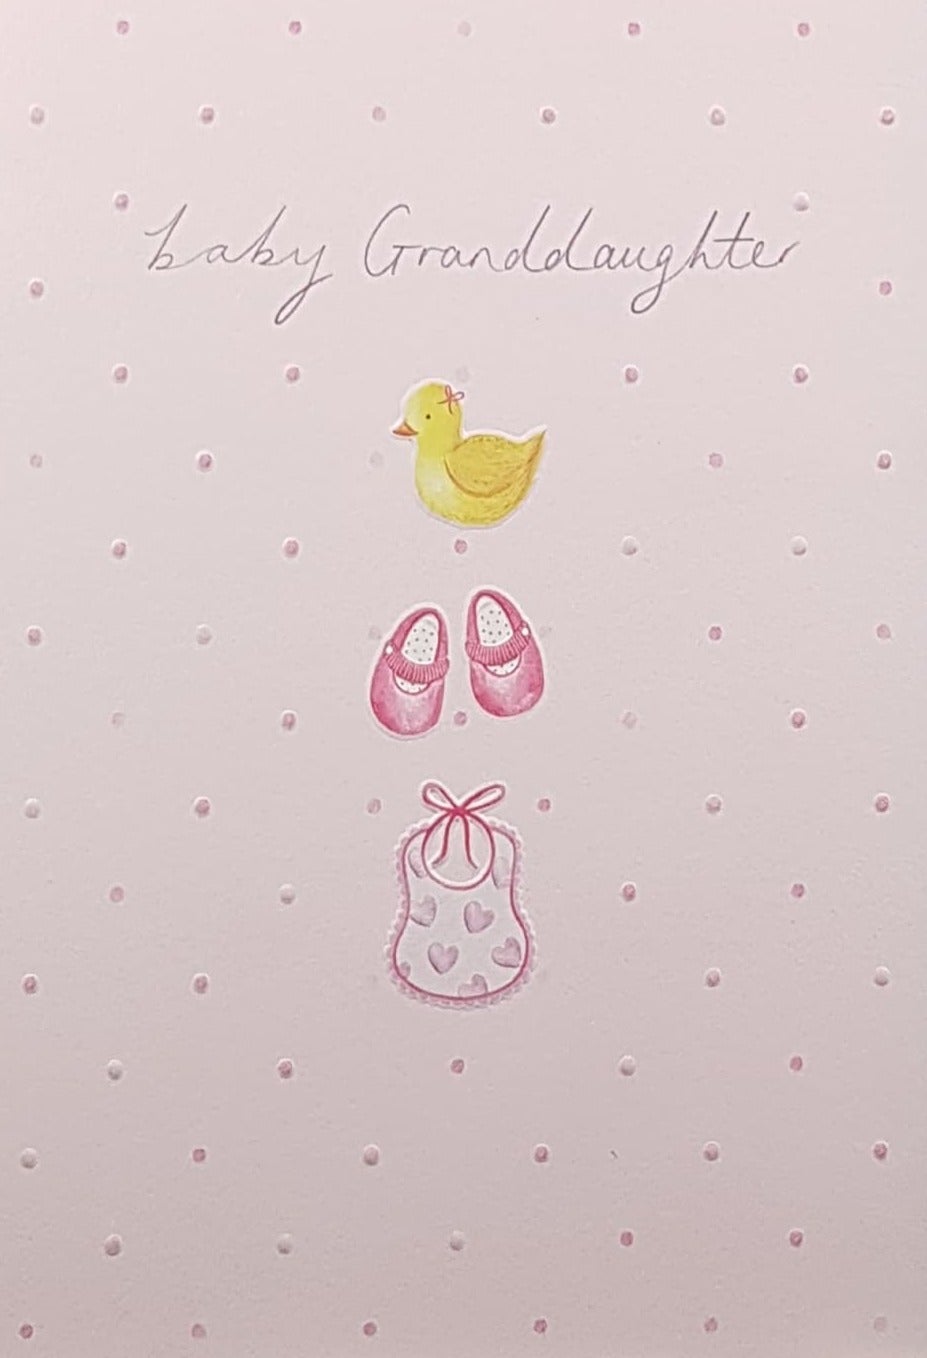 New Granddaughter Card / Pink Baby Shoes, Bib & Duckling